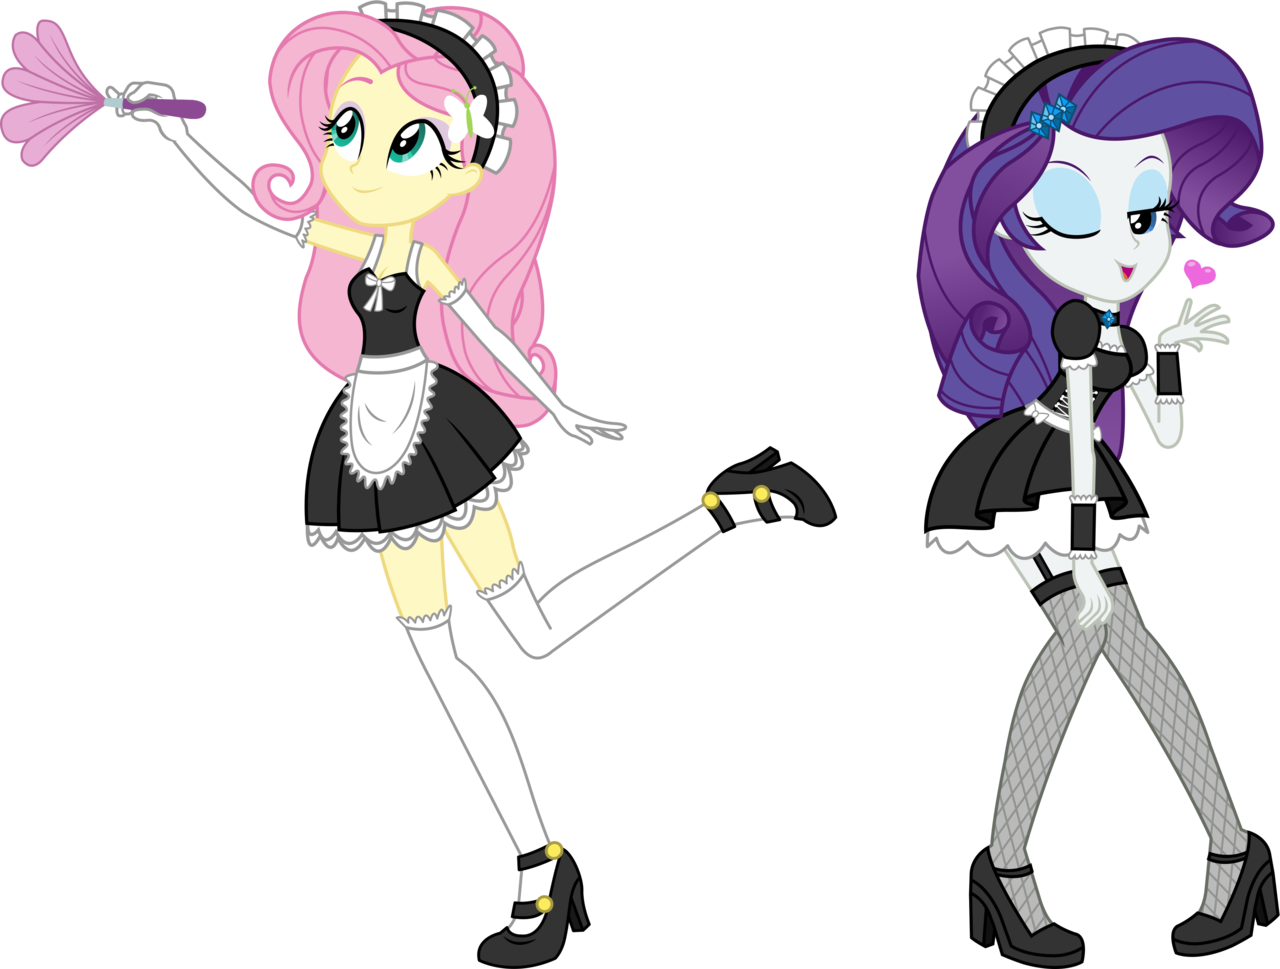 commission__french_maid_fluttershy_and_rarity_by_imperfectxiii-datidak.png